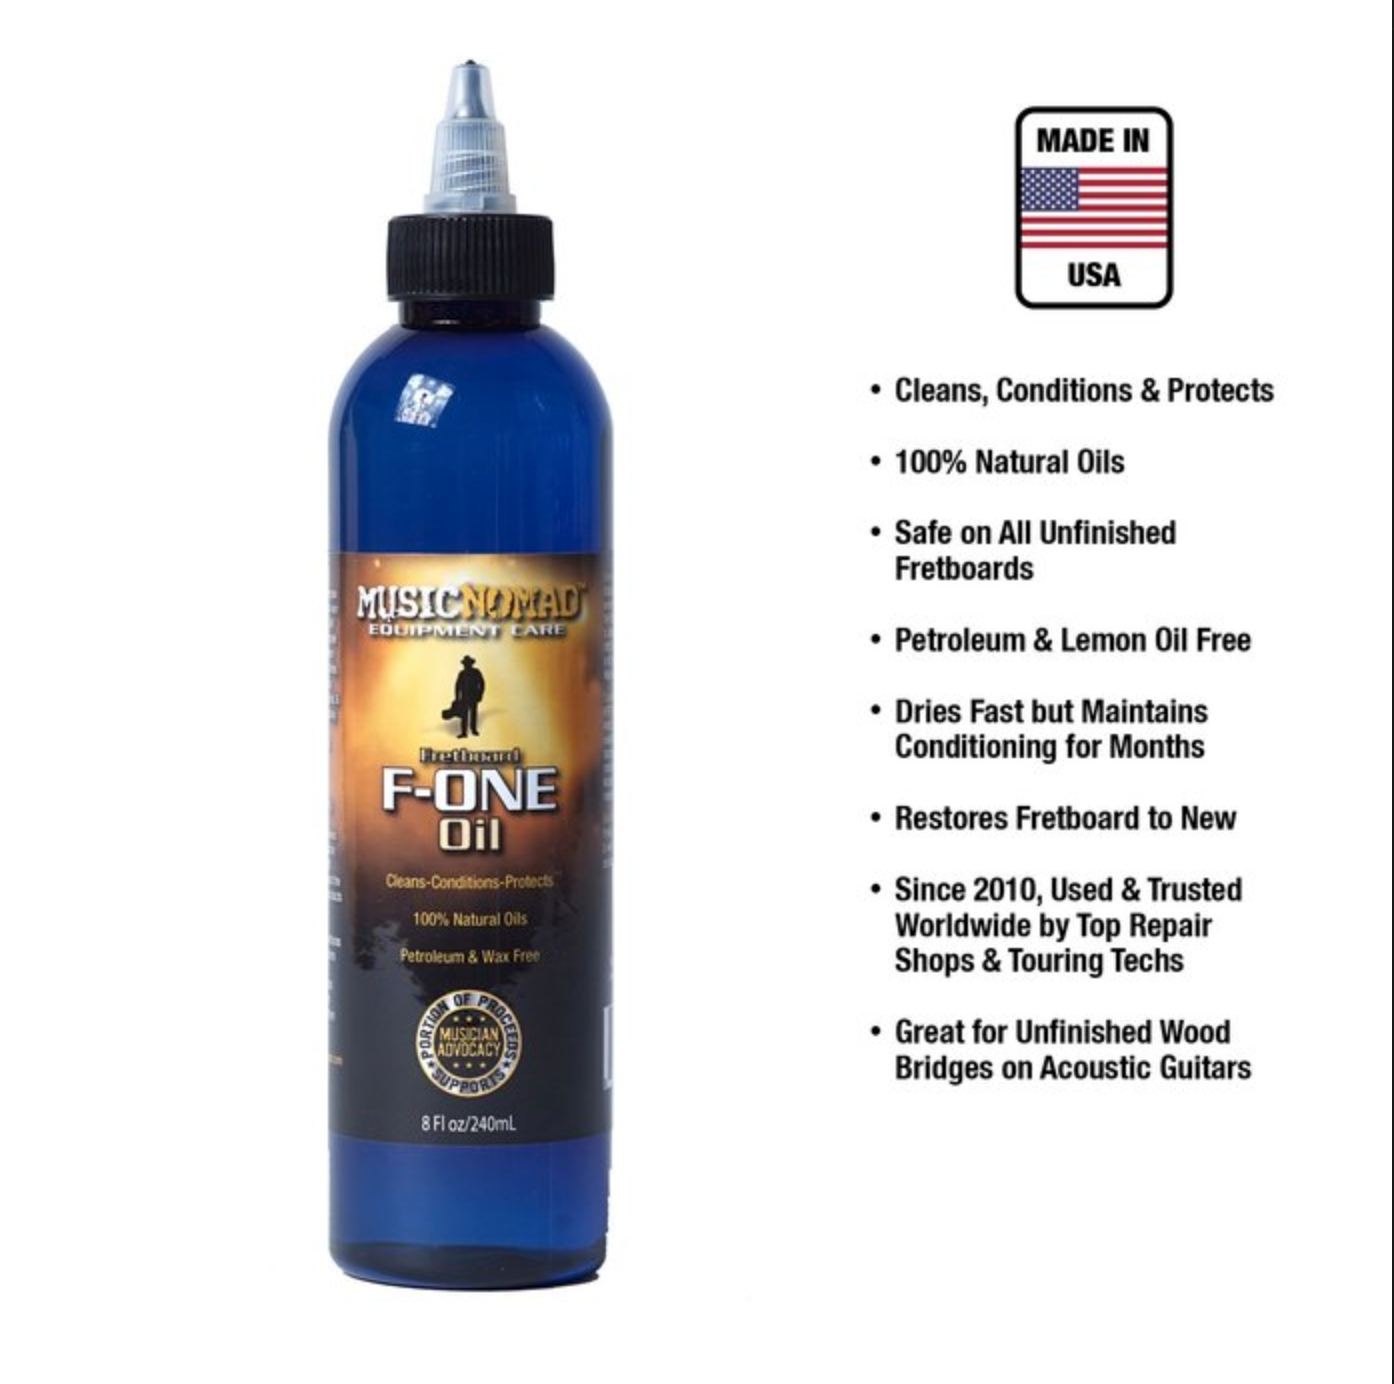 Music Nomad Fretboard F-One Oil - Cleaner & Conditioner - 8 oz S/N: MN151